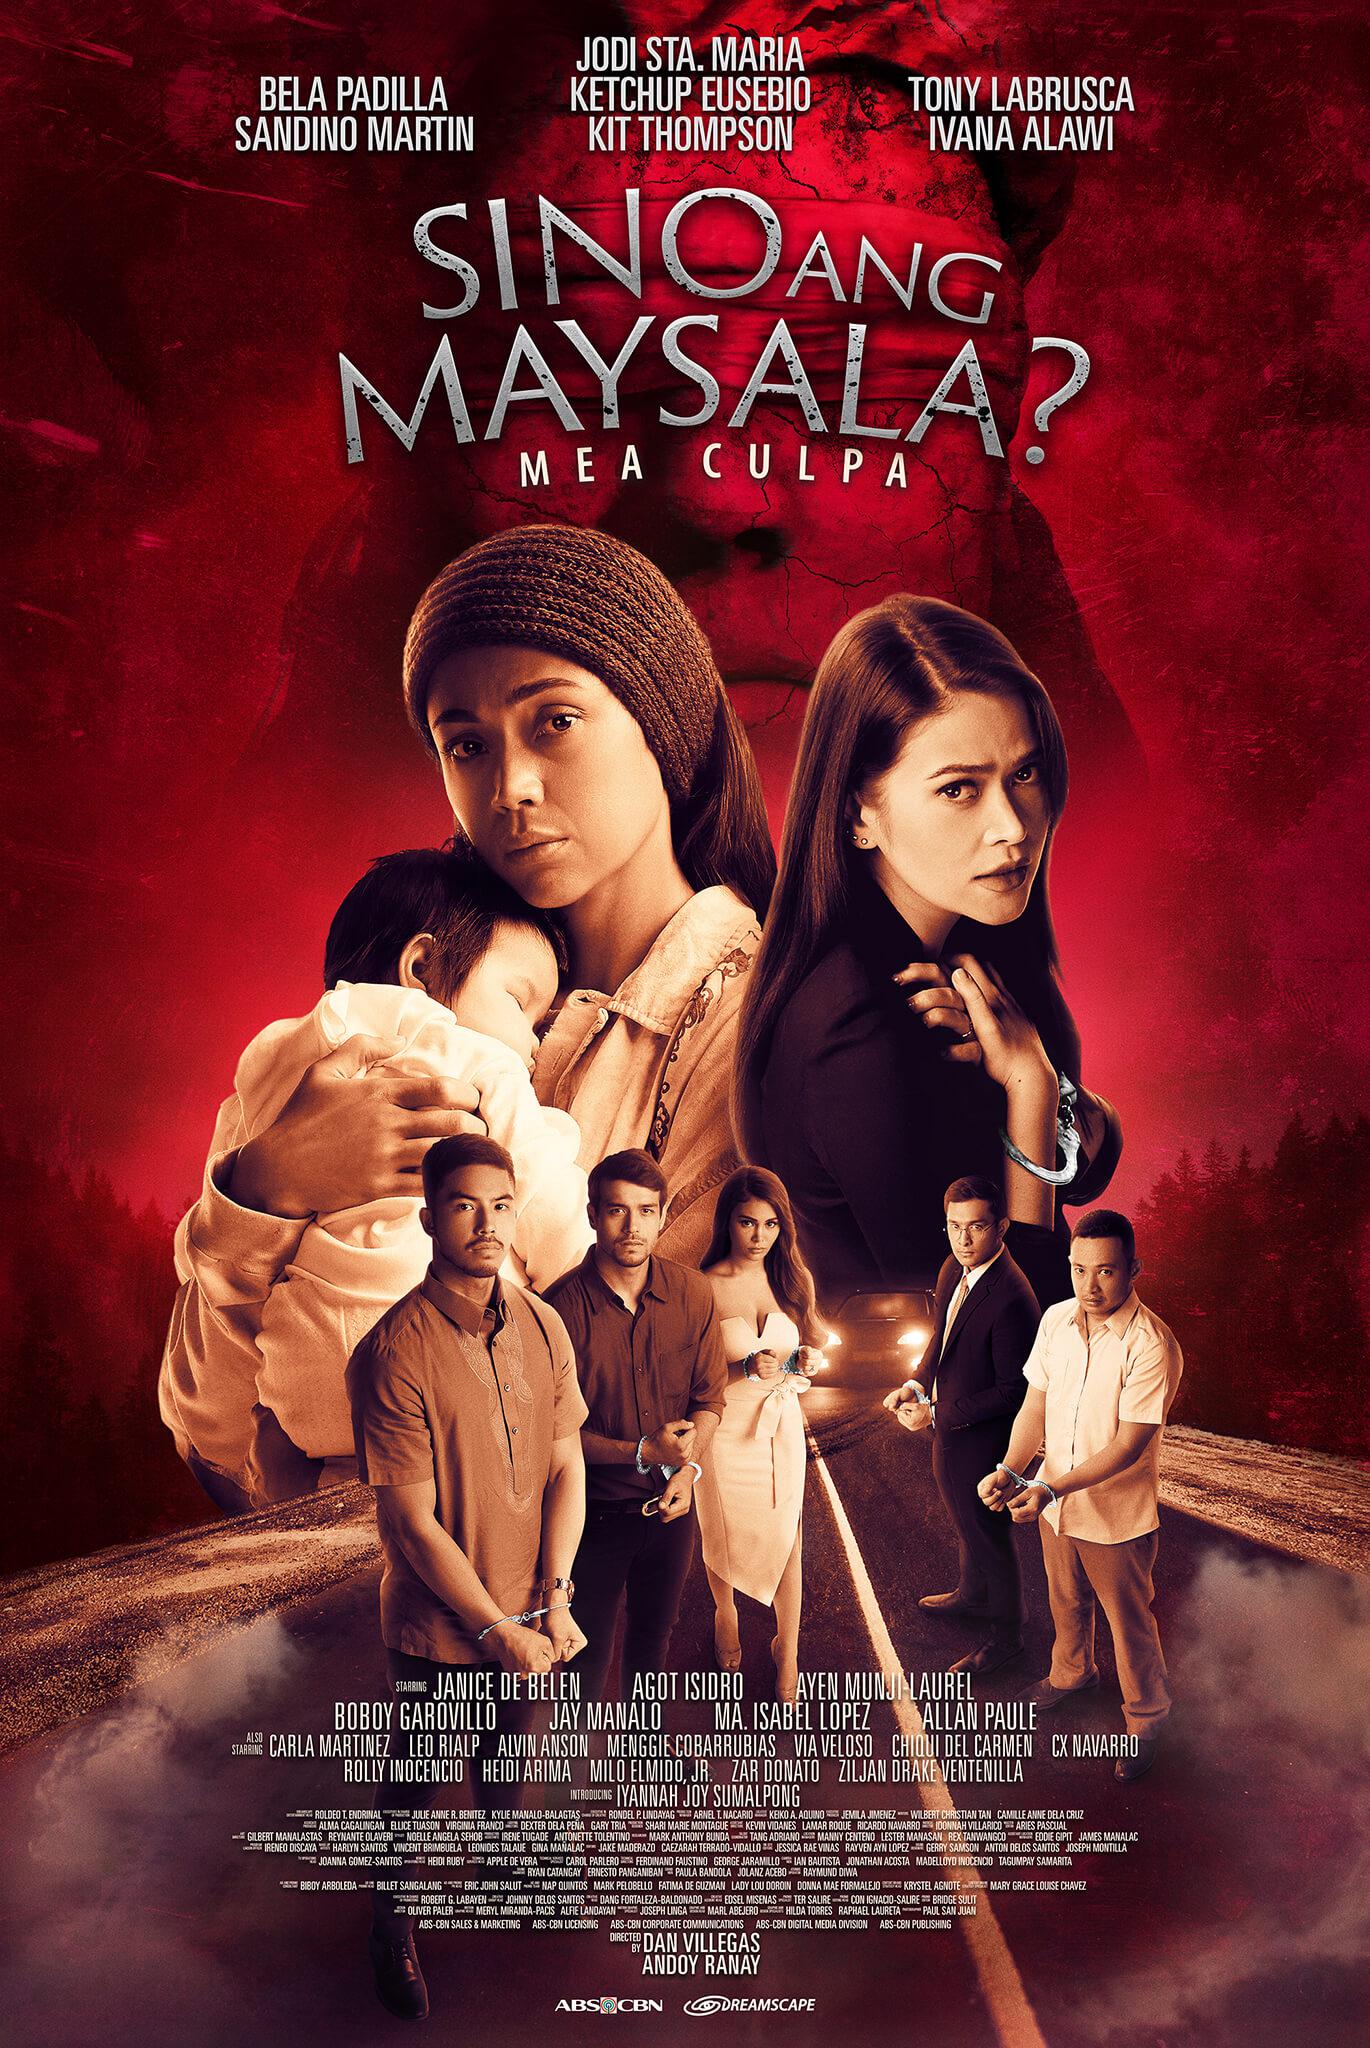 TV ratings for SINO ANG MAYSALA?Mea Culpa in Argentina. ABS-CBN TV series